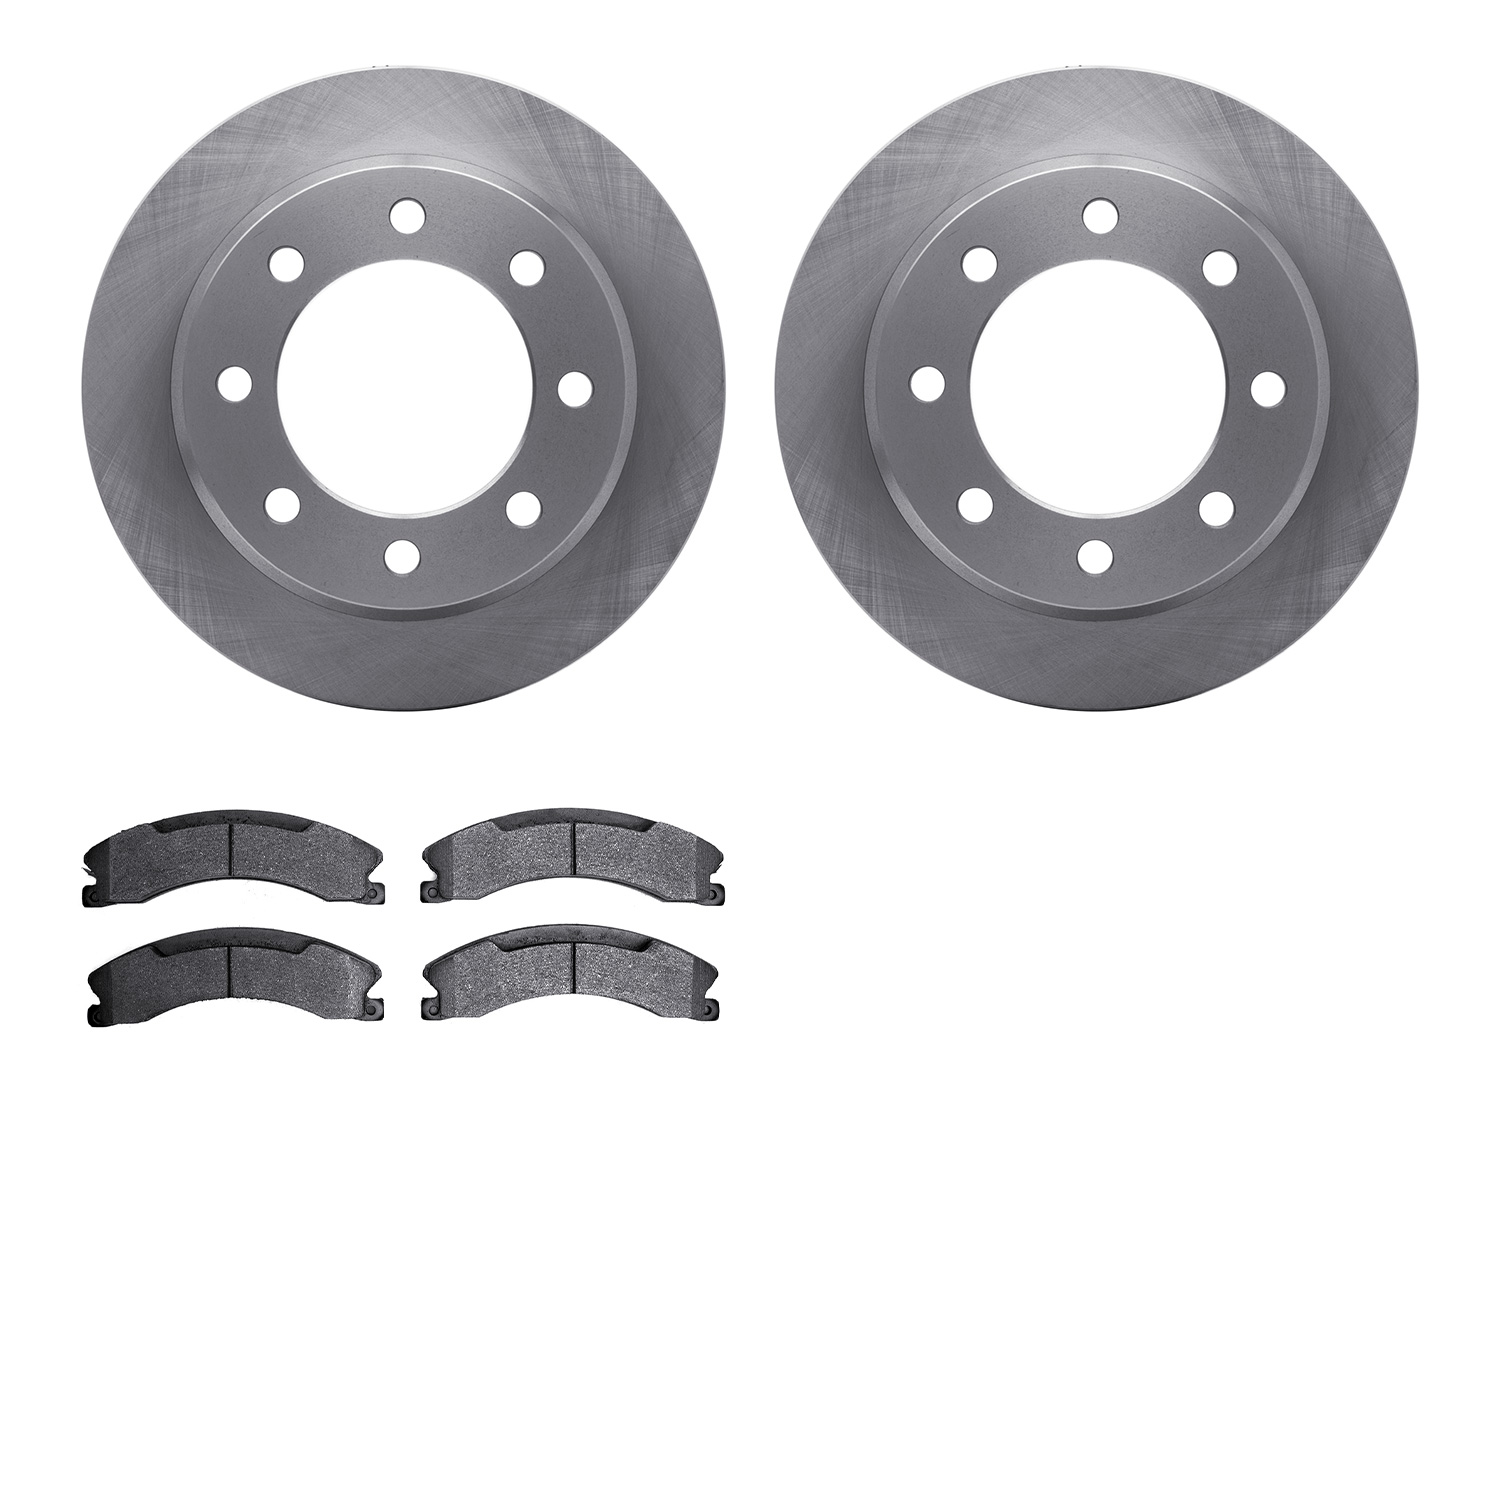 6402-48118 Brake Rotors with Ultimate-Duty Brake Pads, 2009-2020 GM, Position: Rear